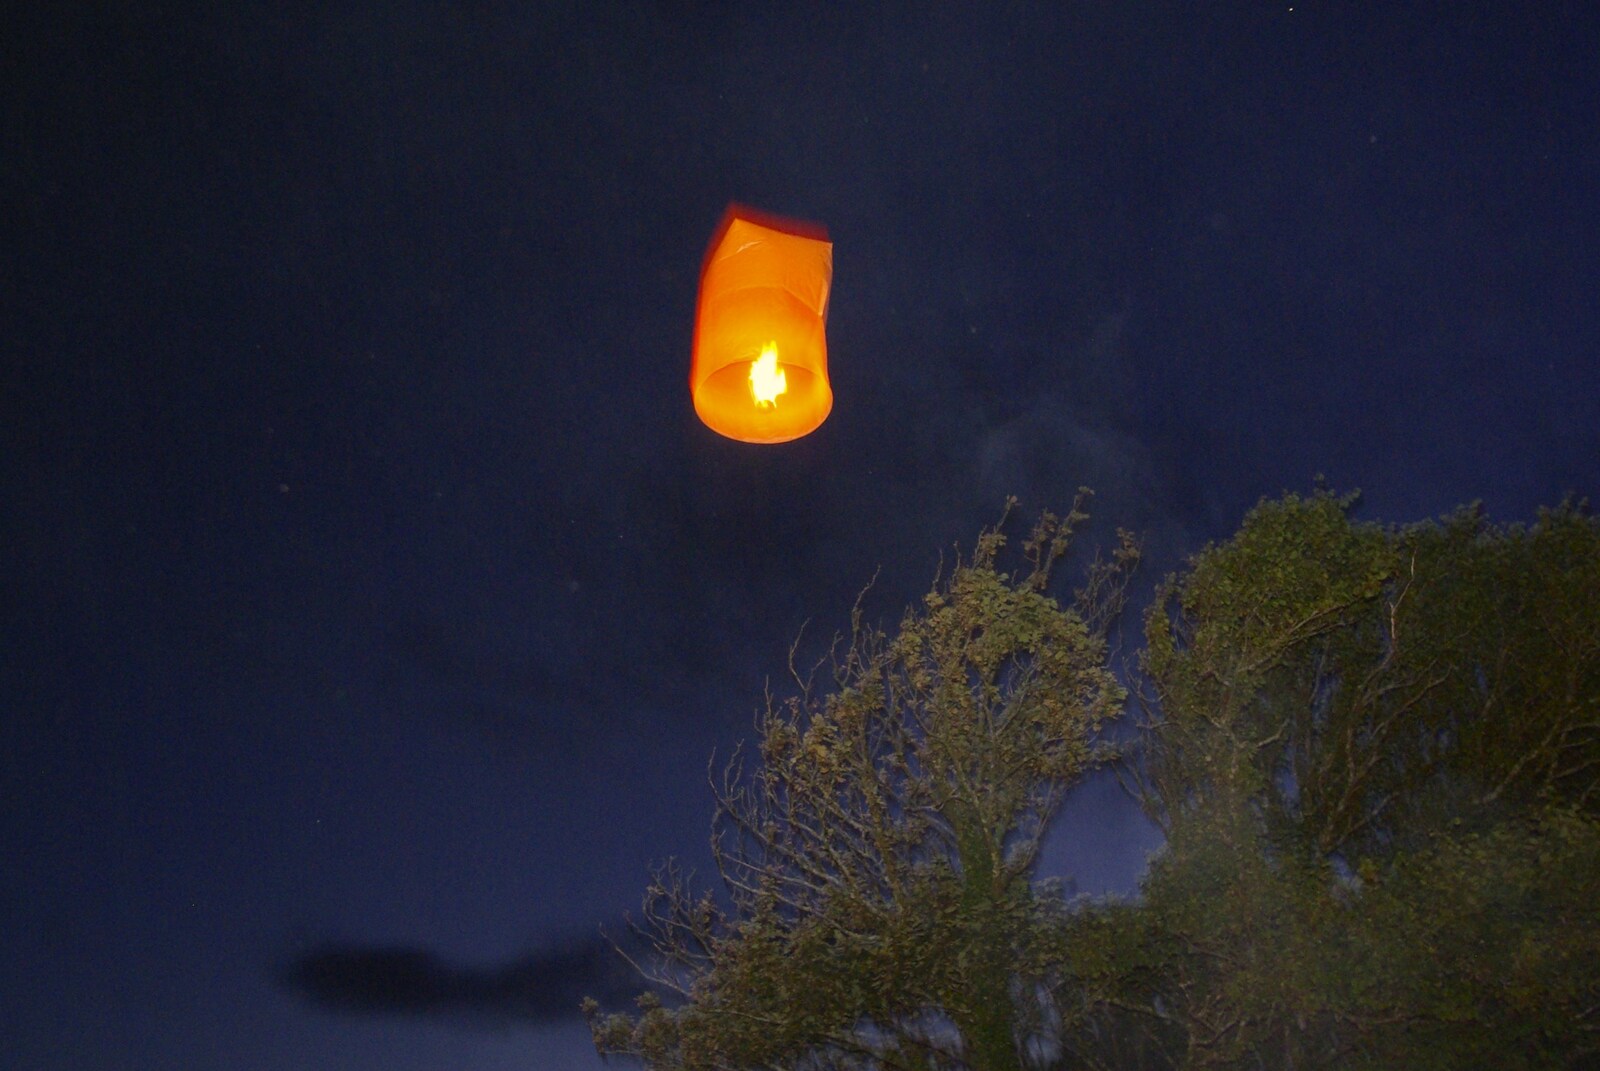 A lantern floats off from Julie and Cameron's Wedding, Ballintaggart House, Dingle - 24th July 2009